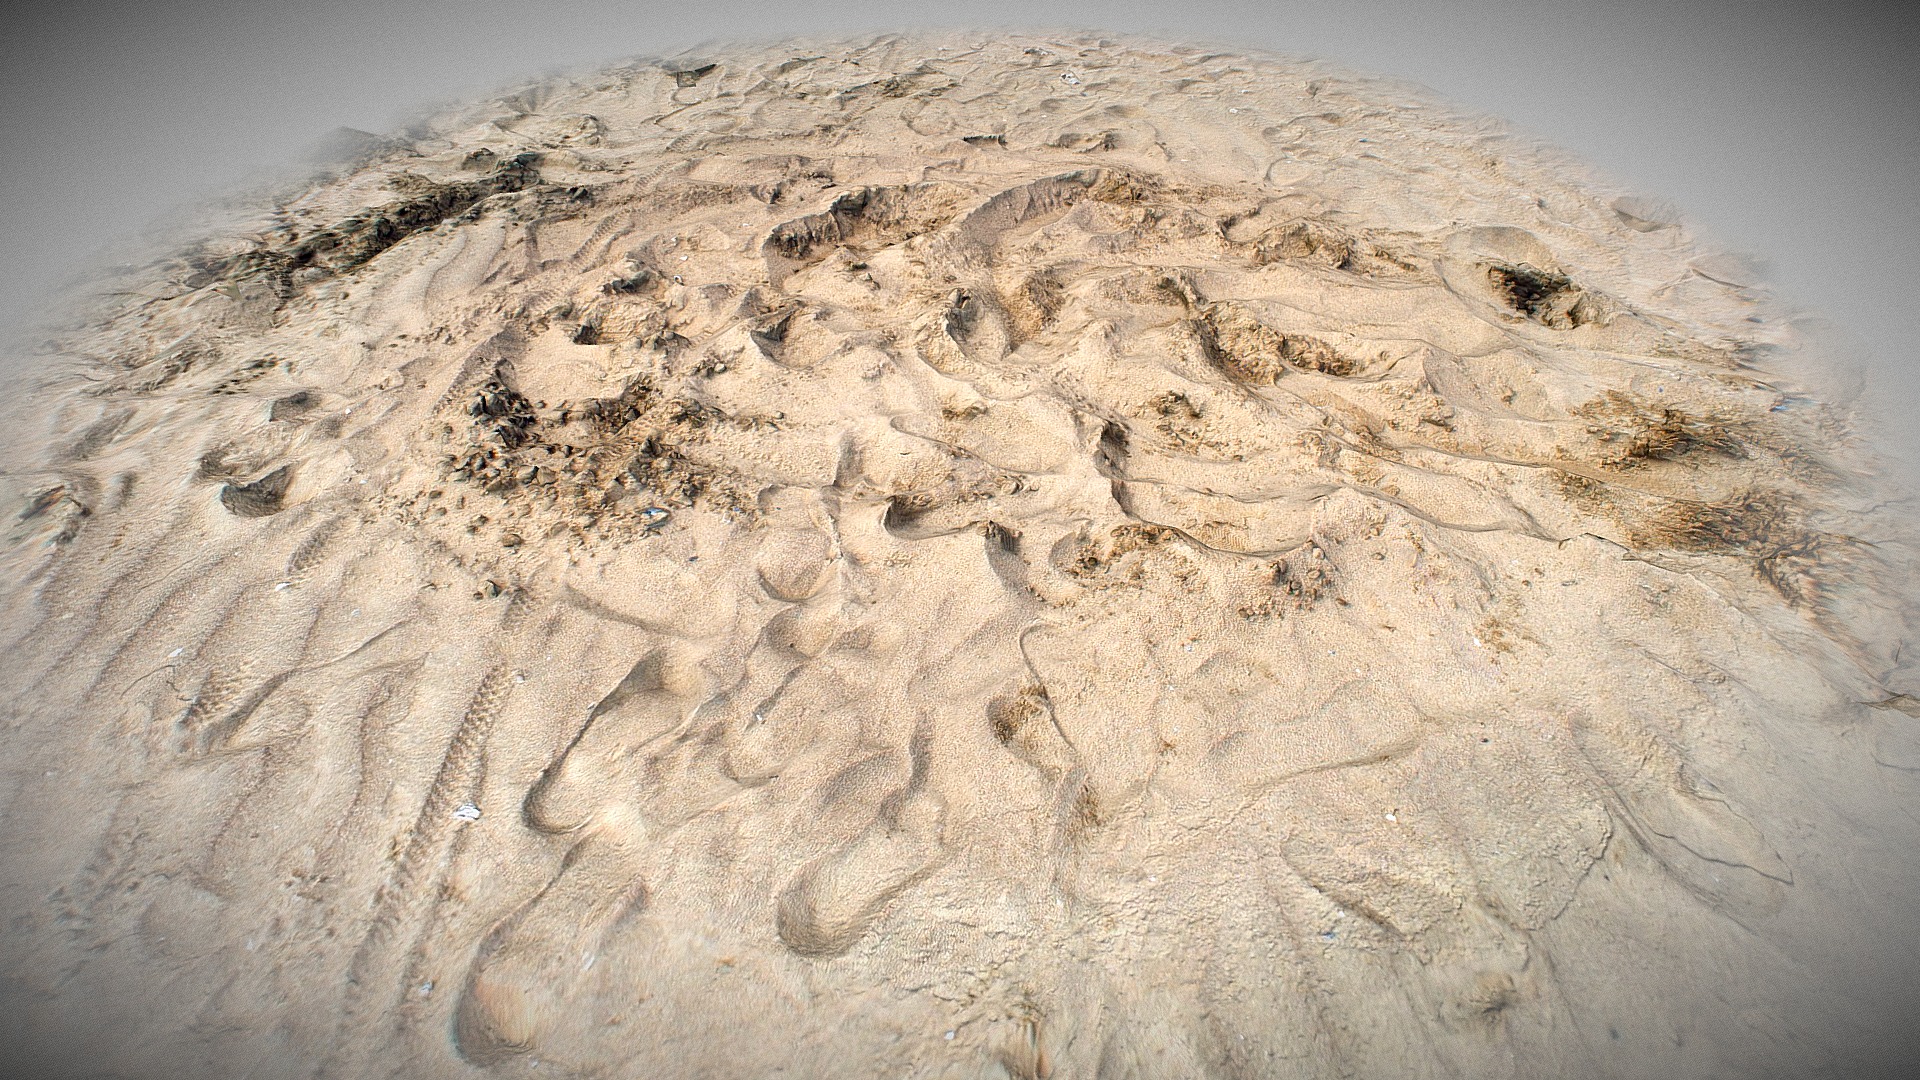 3D model PBR Texture scan – SAND - This is a 3D model of the PBR Texture scan - SAND. The 3D model is about a large area of sand.